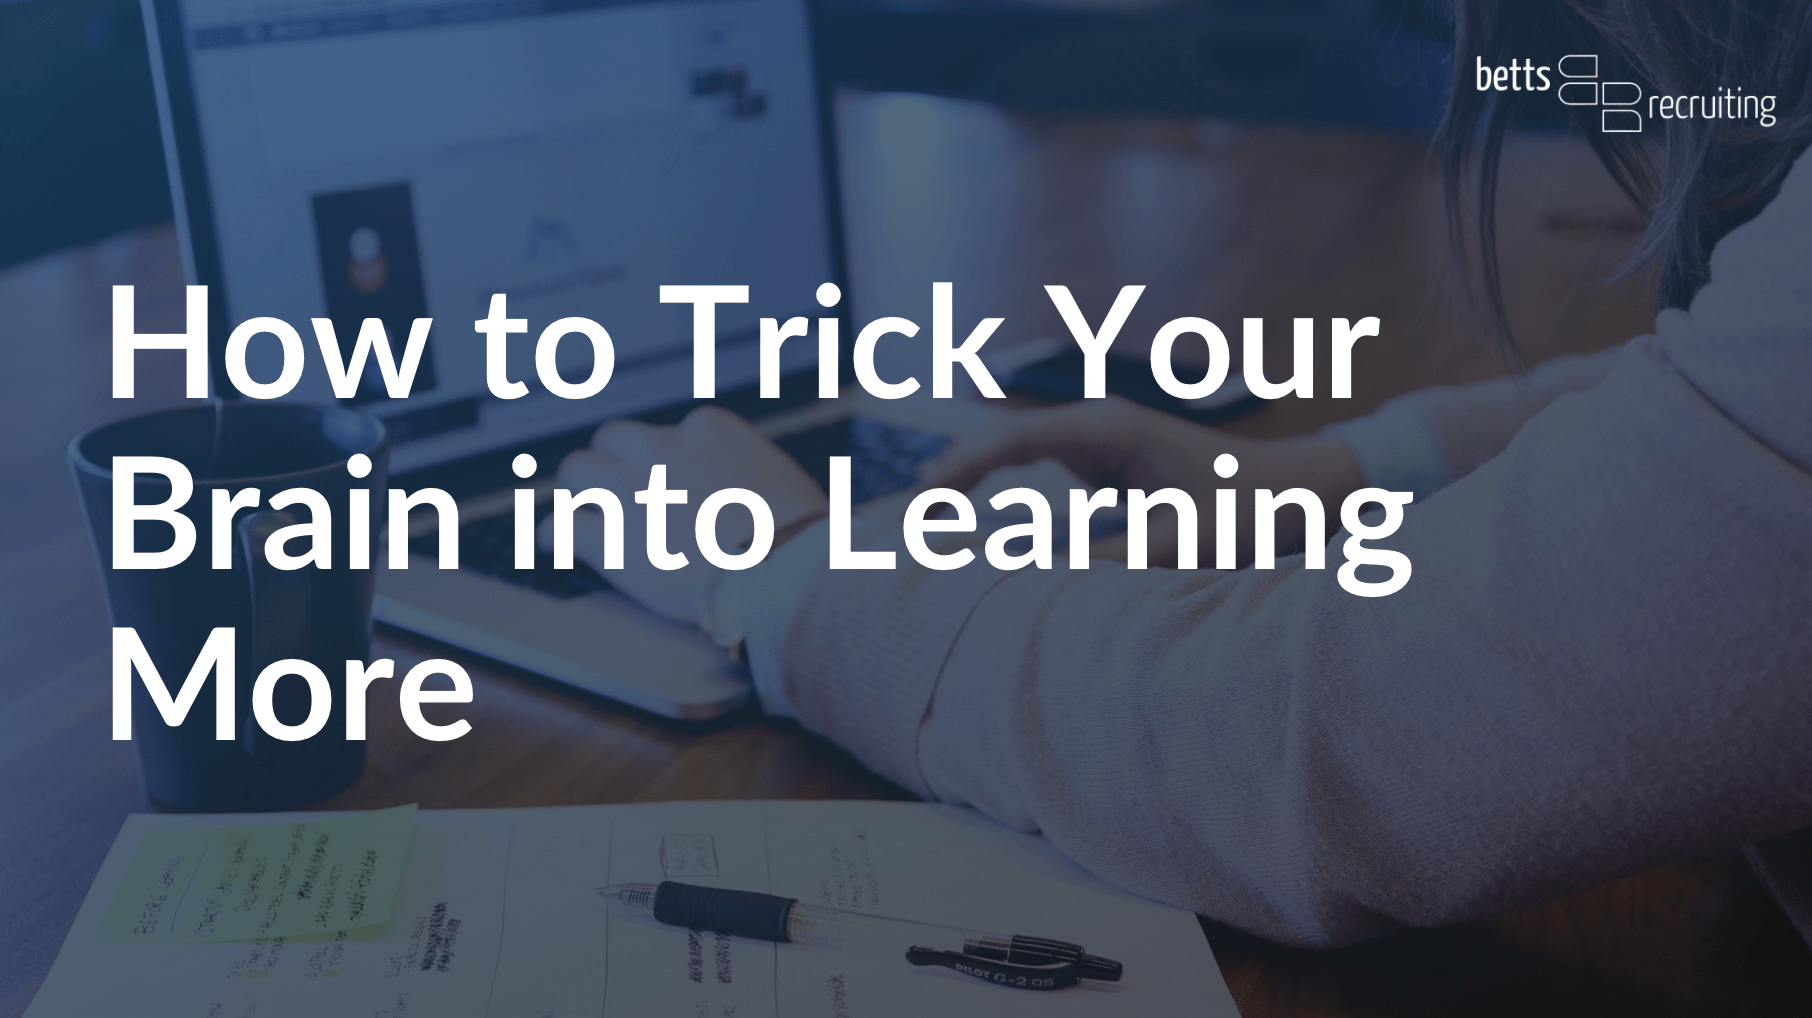 How to Trick Your Brain into Learning More